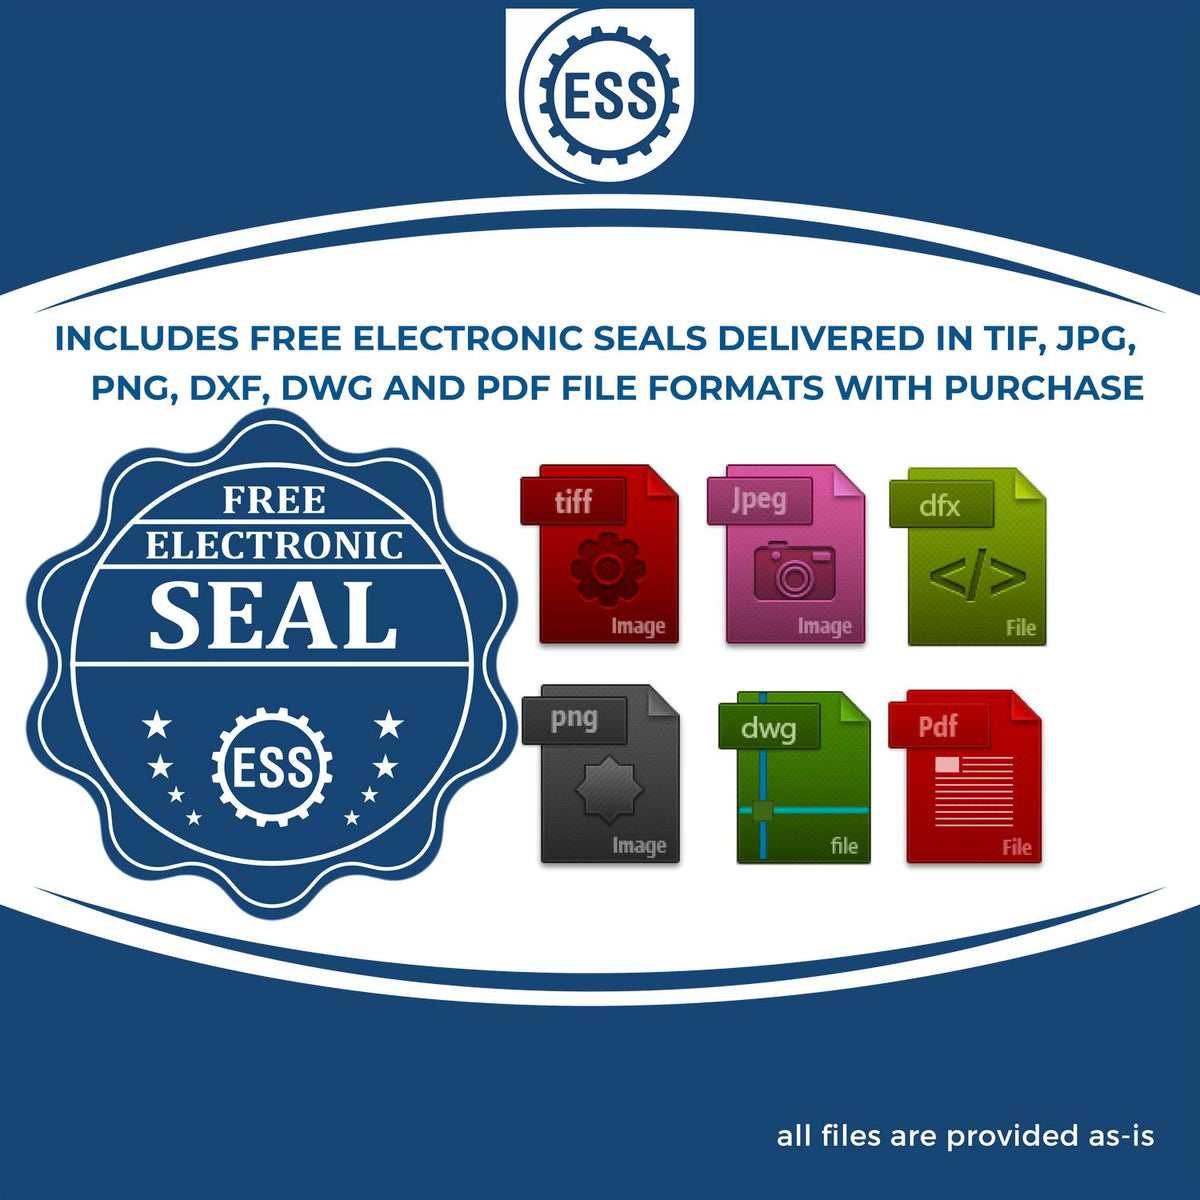 An infographic for the free electronic seal for the Slim Pre-Inked Mississippi Professional Geologist Seal Stamp illustrating the different file type icons such as DXF, DWG, TIF, JPG and PNG.